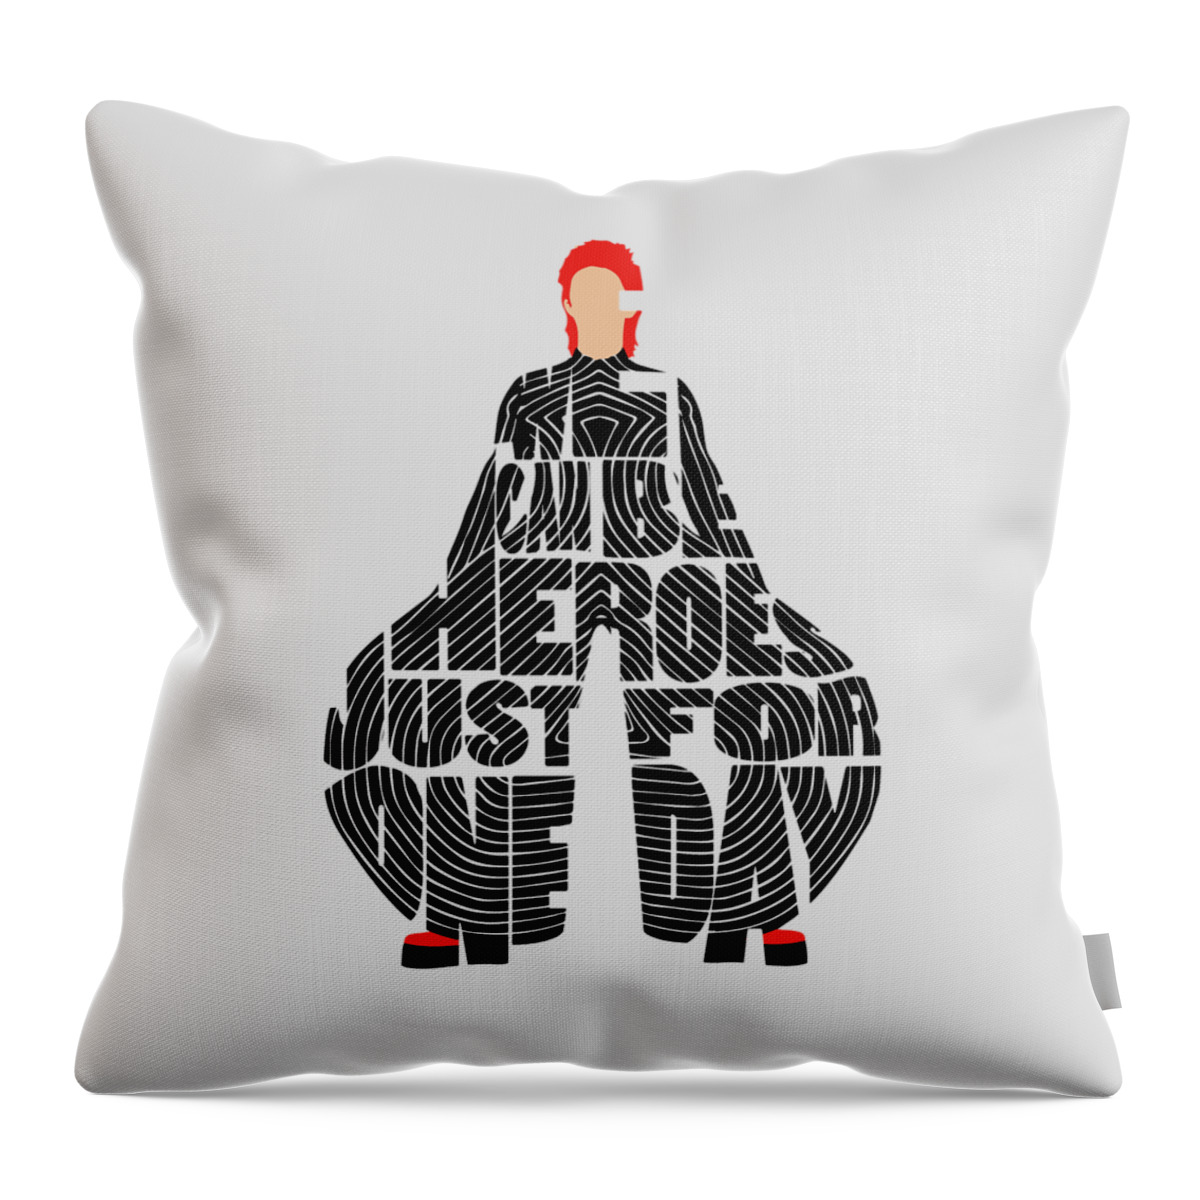 David Throw Pillow featuring the digital art David Bowie Typography Art by Inspirowl Design